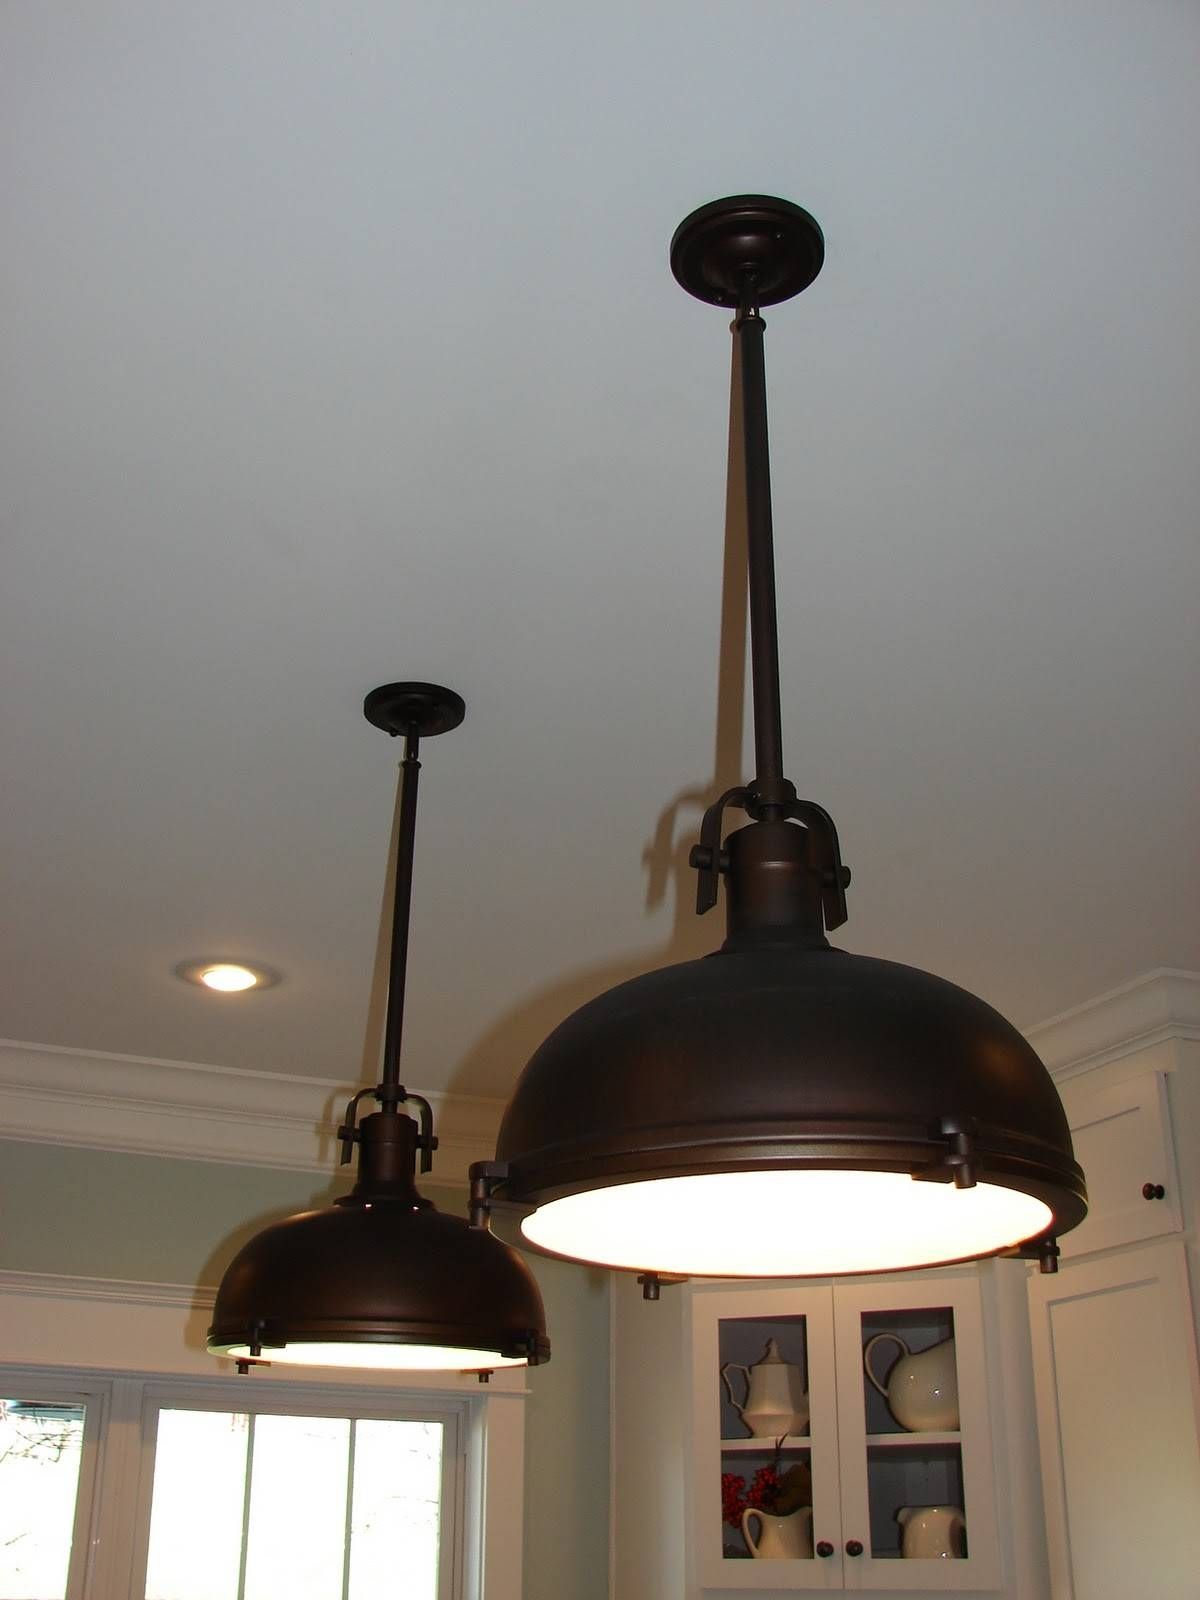 Astonishing Industrial Pendant Light Fixtures 51 On Lowes Pendant Pertaining To Light Pendants Lowes (View 7 of 15)